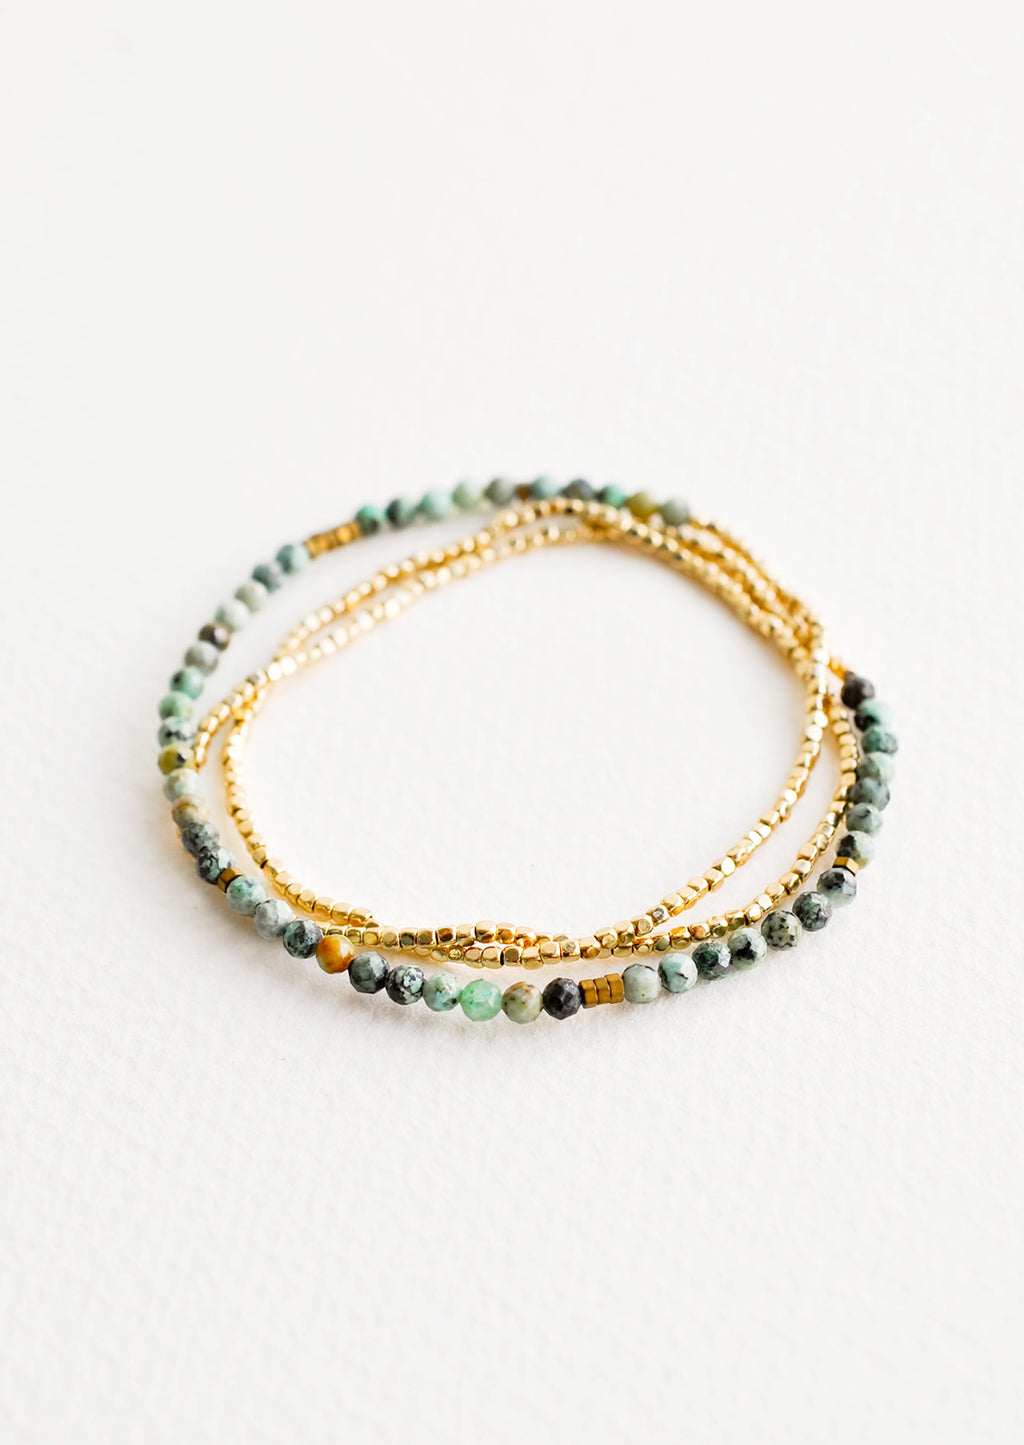 African Turquoise: A single strand bracelet of gold and multi-colored turquoise beads wrapped upon itself in three layers. 